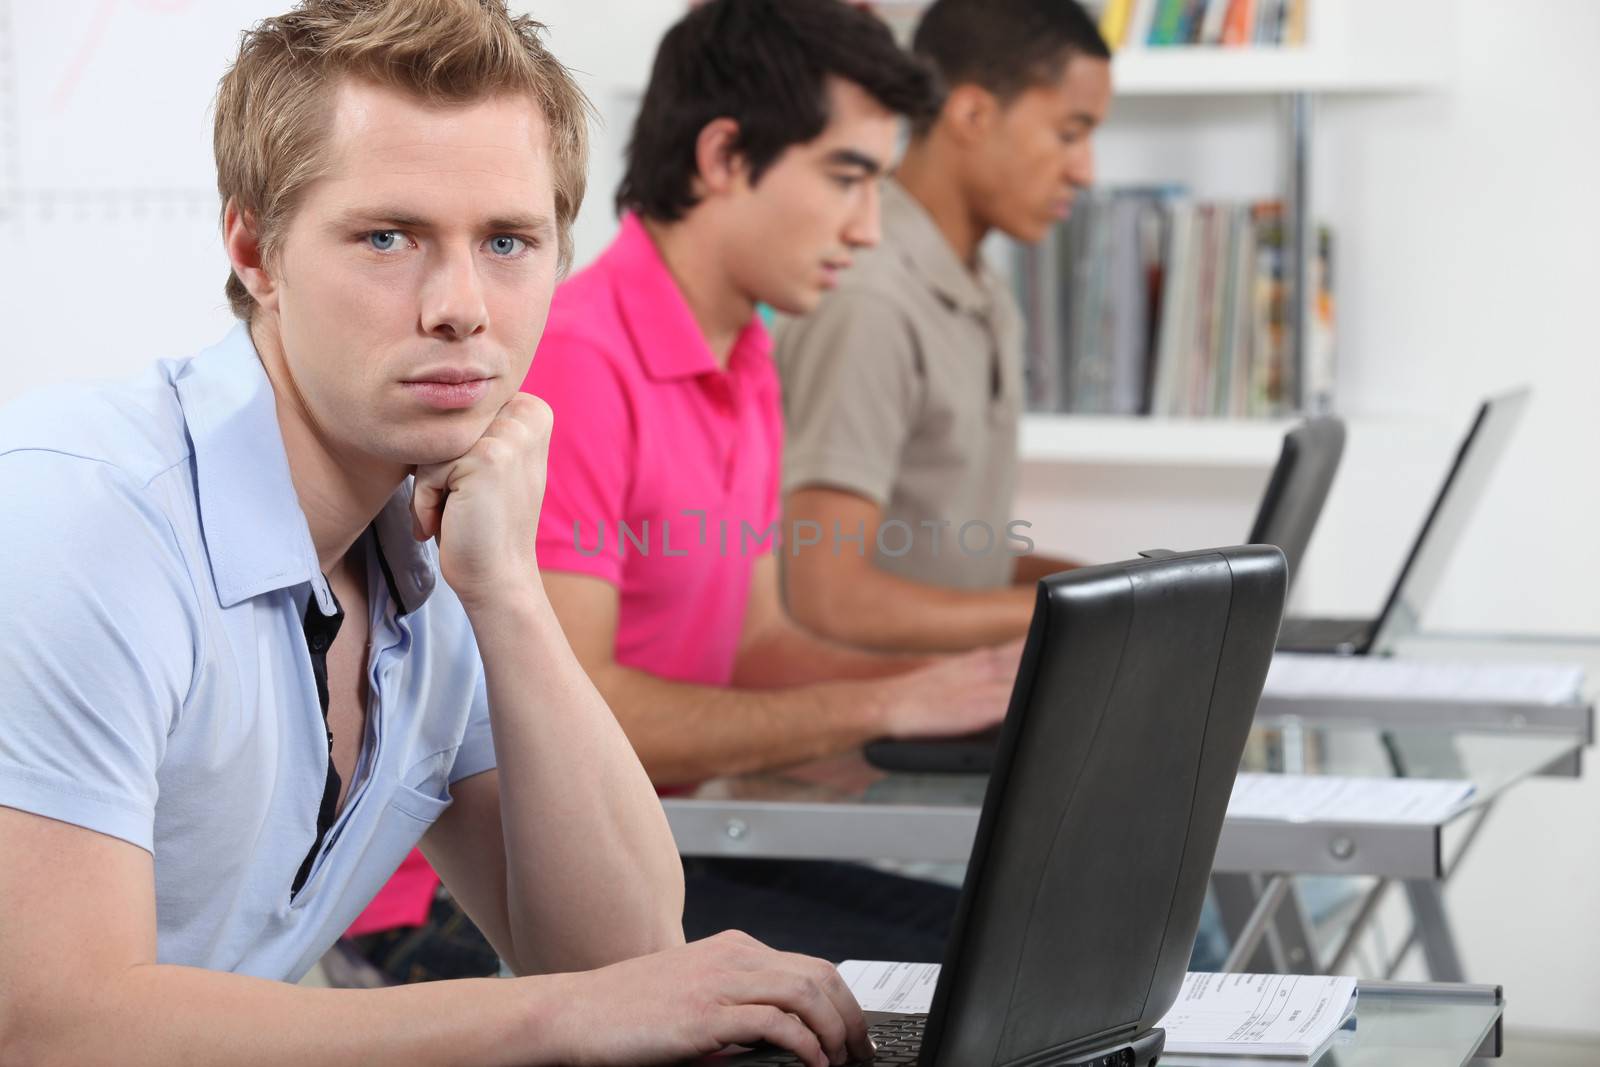 Three male students with laptops in classroom